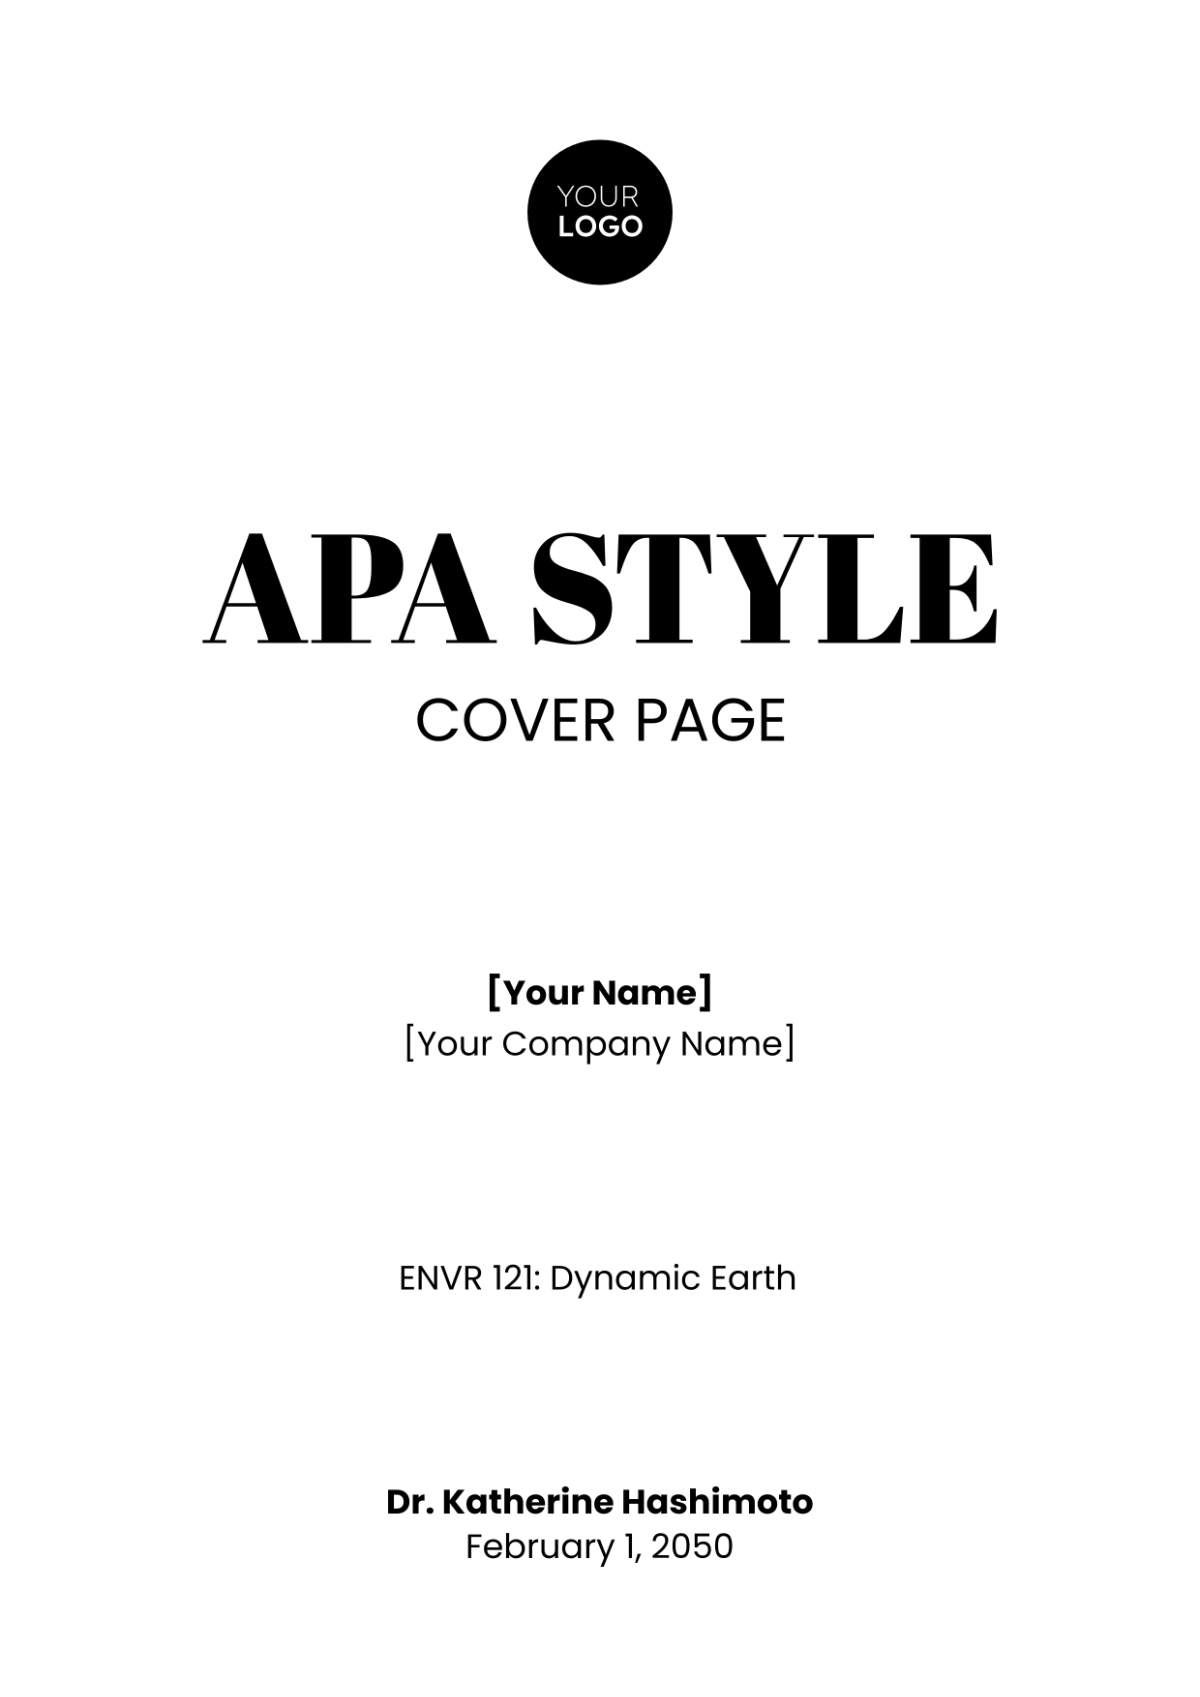 APA Style Cover Page